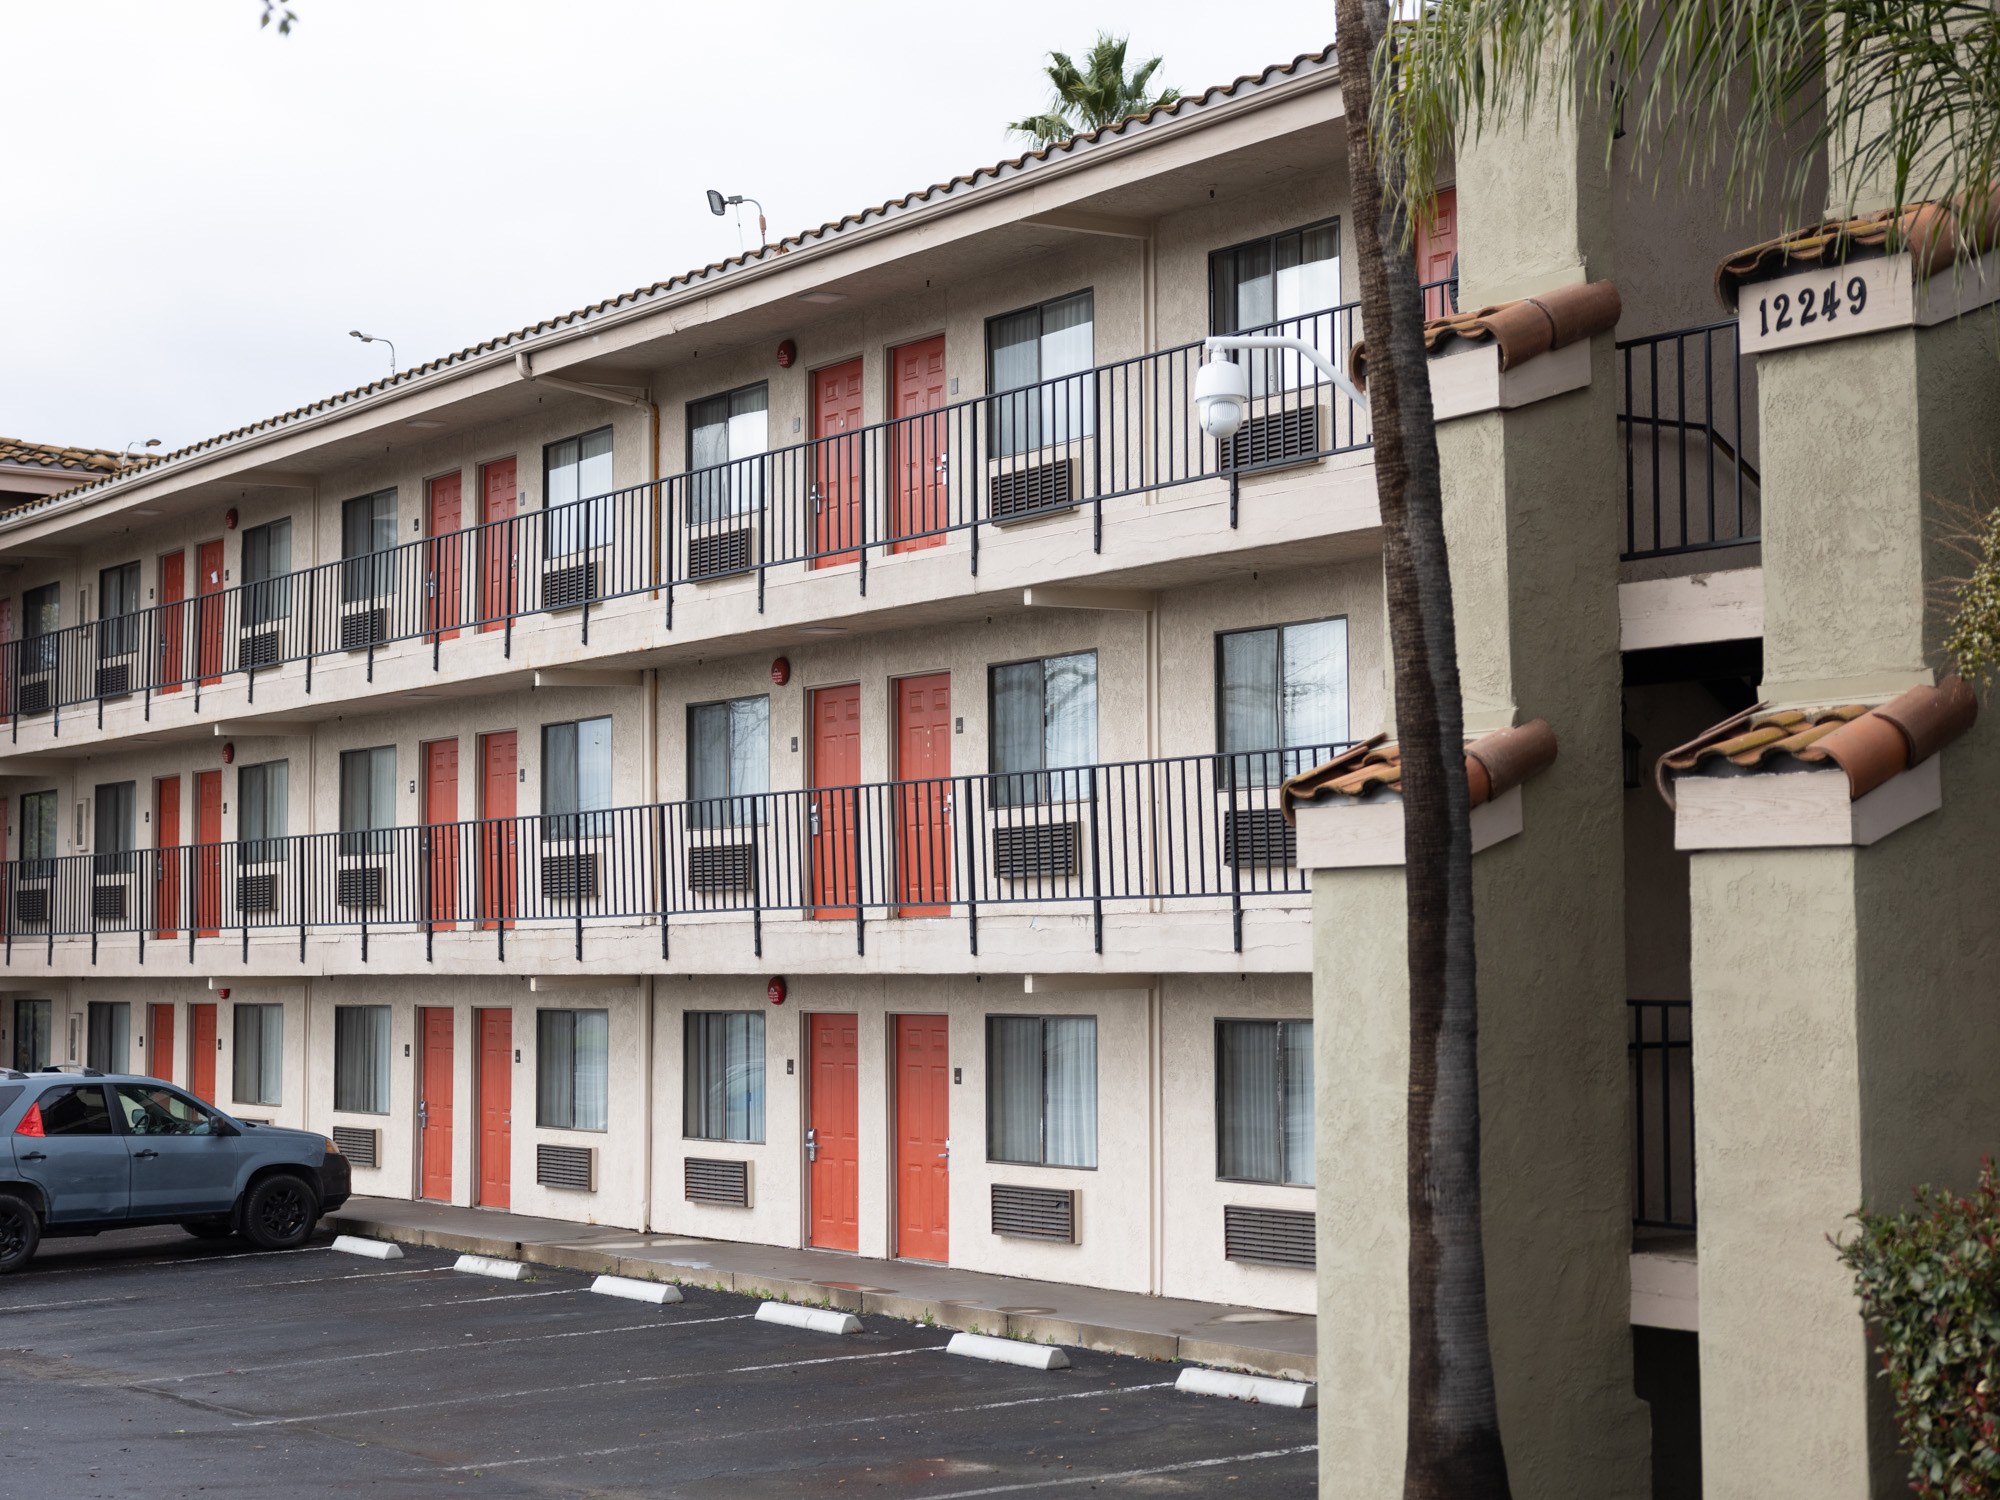 Project Roomkey motels extended for homeless residents 50 years in local news Major holidays this time of year pic